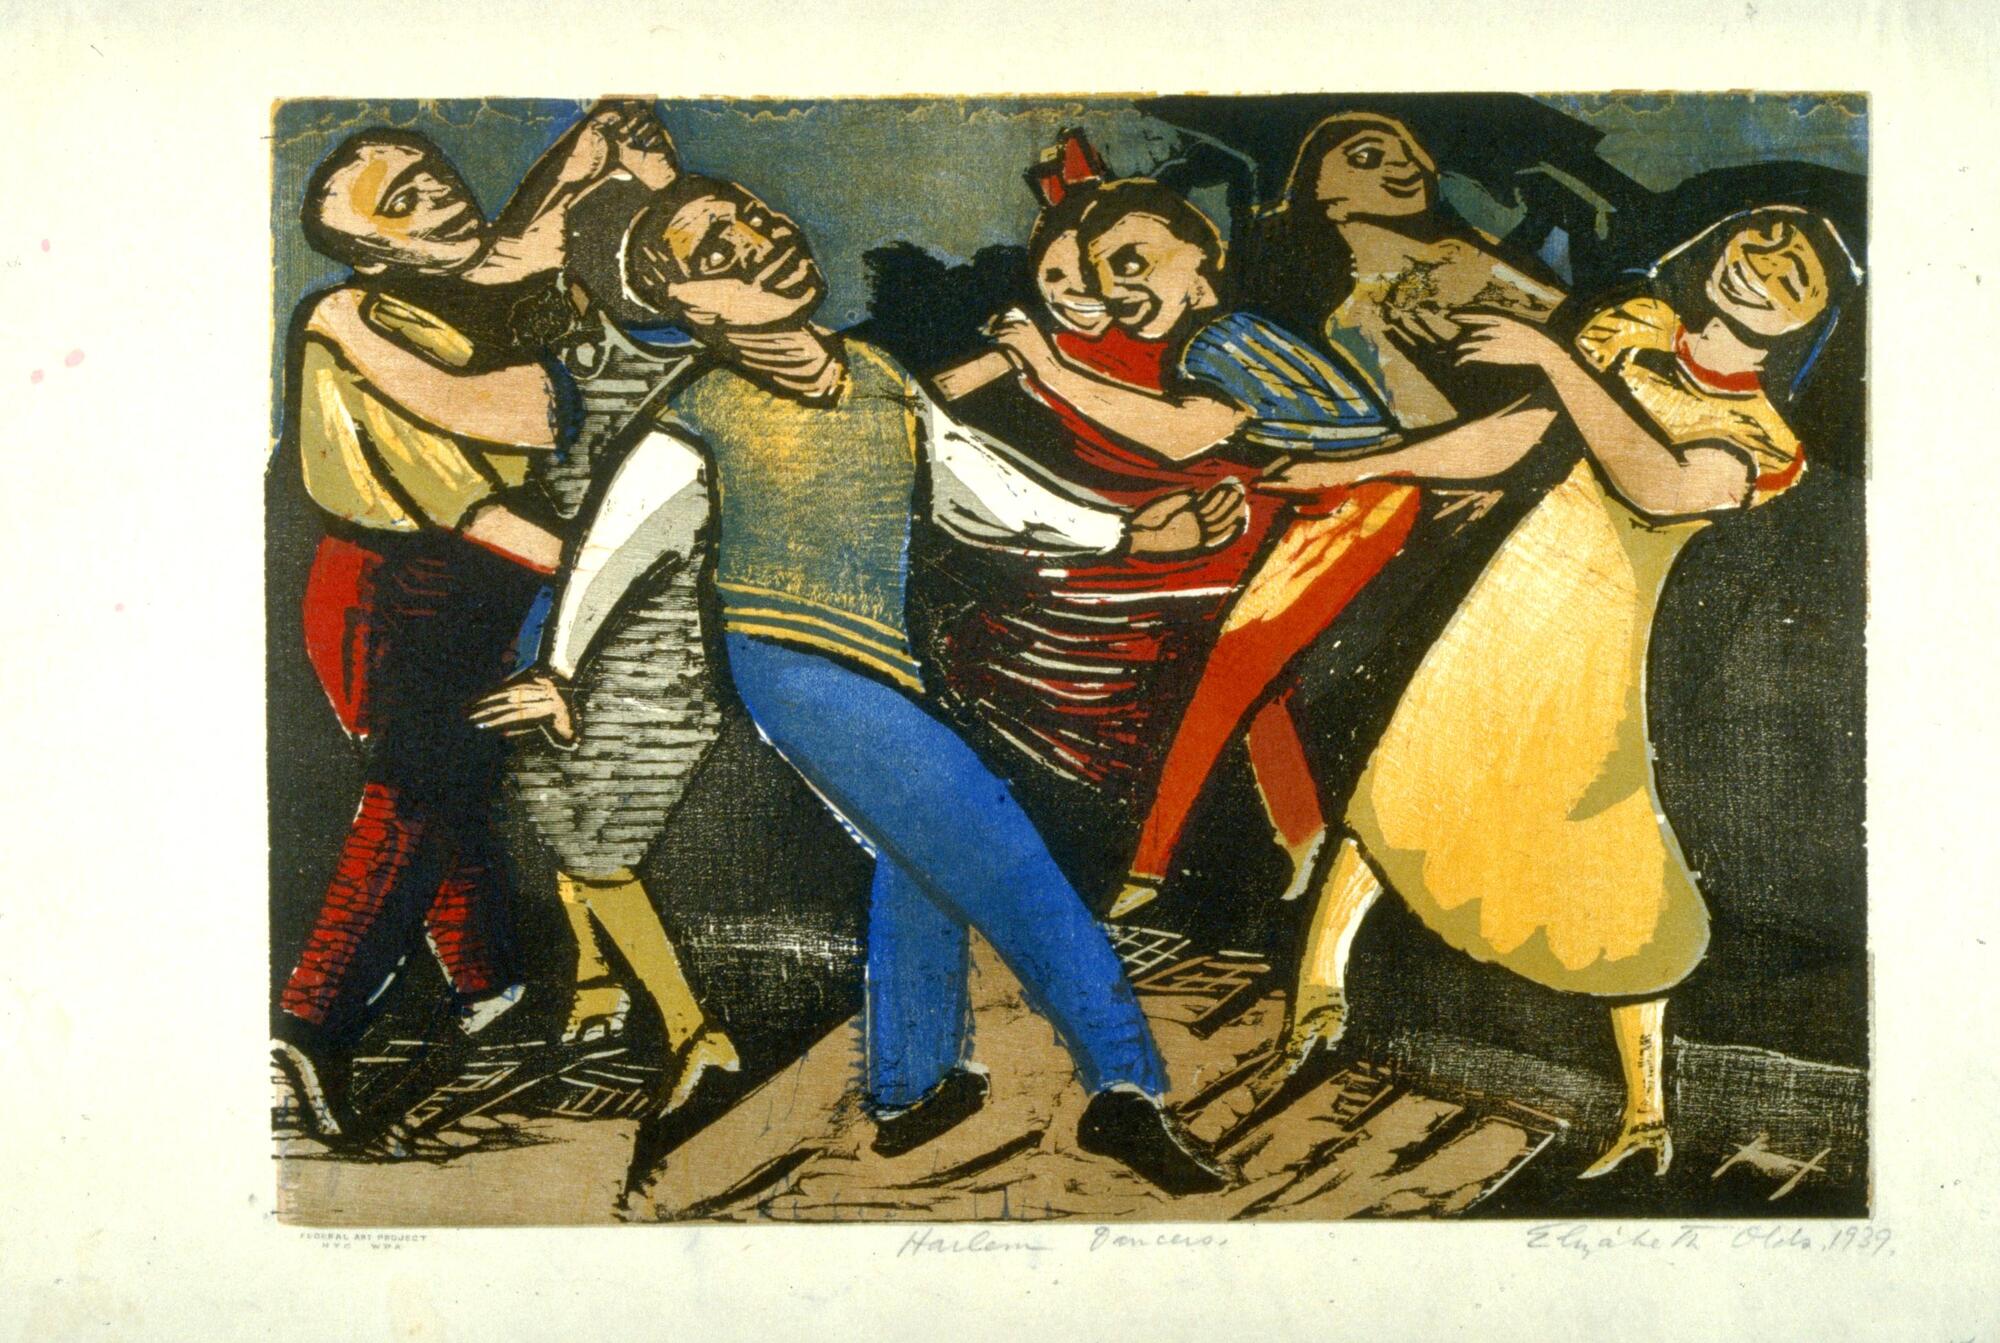 Seven figures wearing brightly colored clothes dance together in a room.